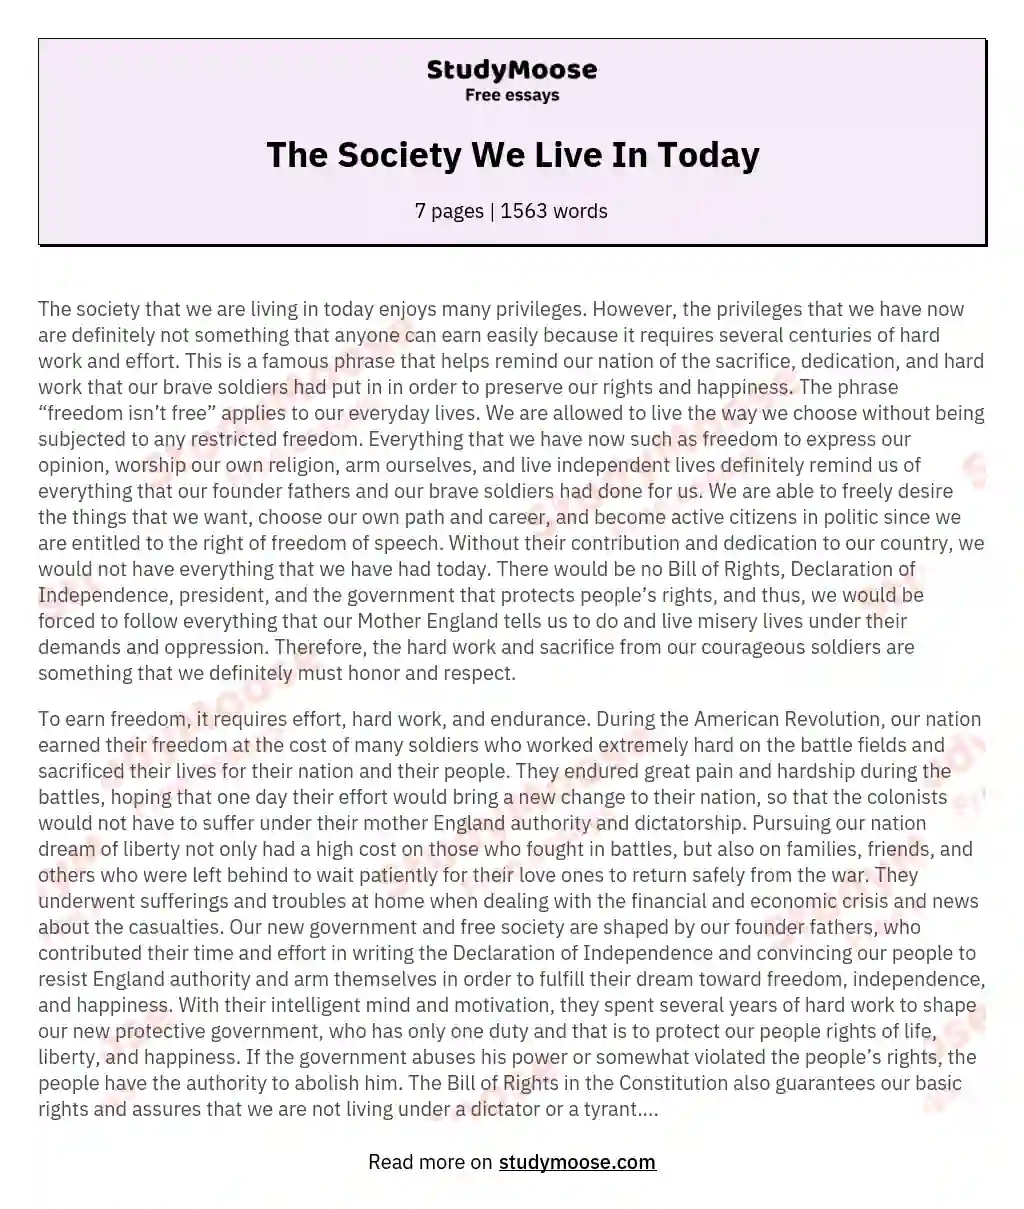 The Society We Live In Today essay